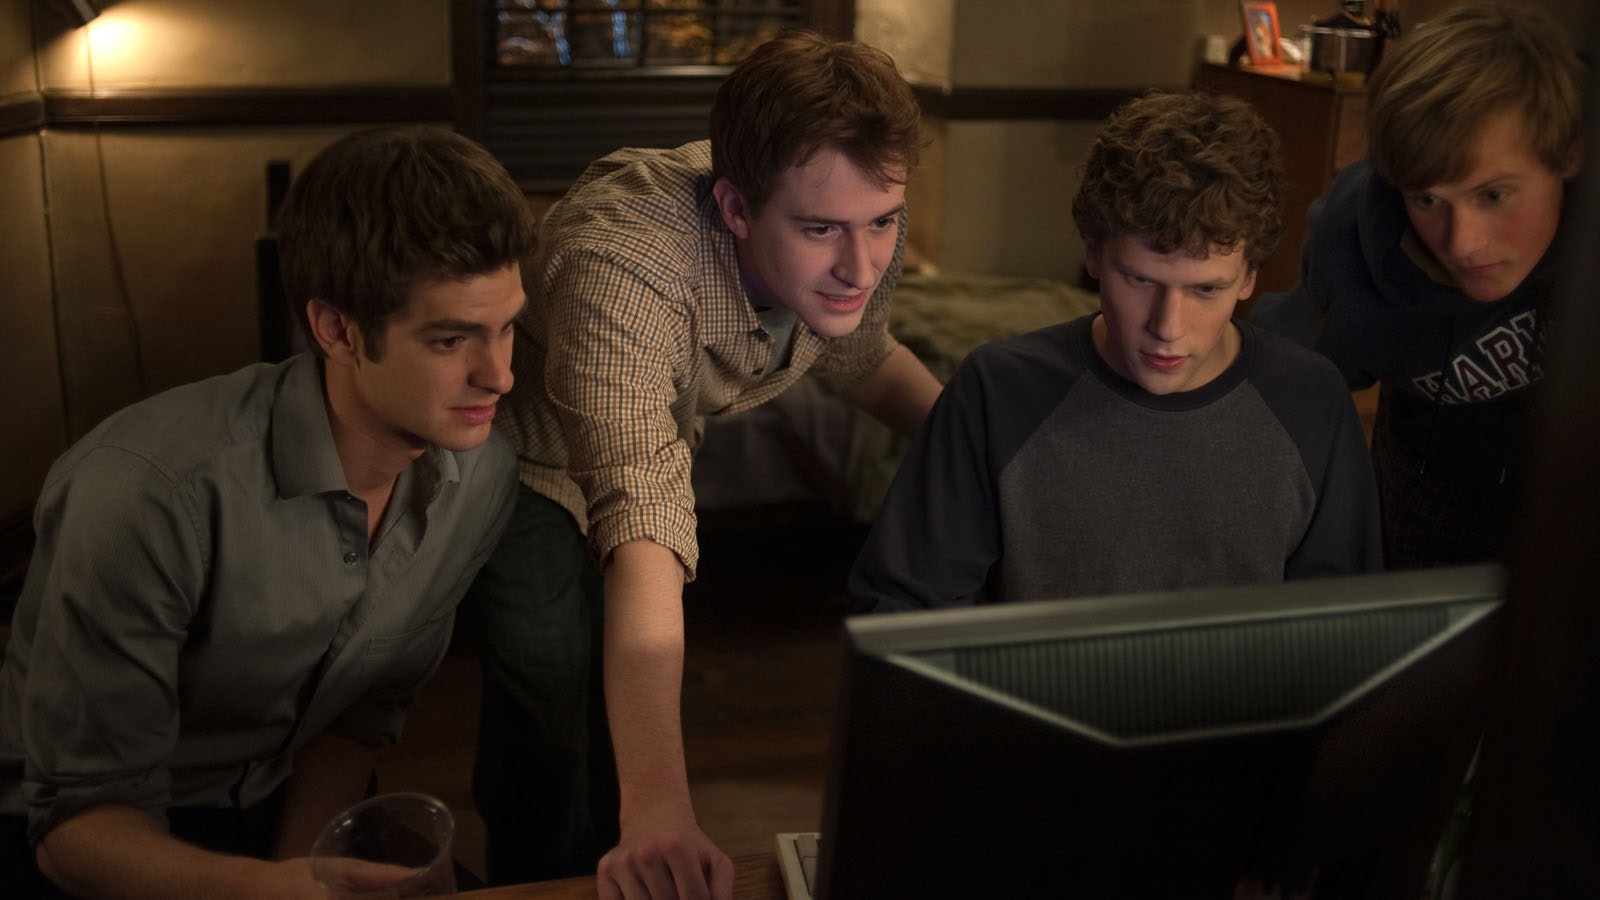 L-r, Andrew Garfield, Joseph Mazzello, Jesse Eisenberg and Patrick Maple in Columbia Pictures' "The Social Network."